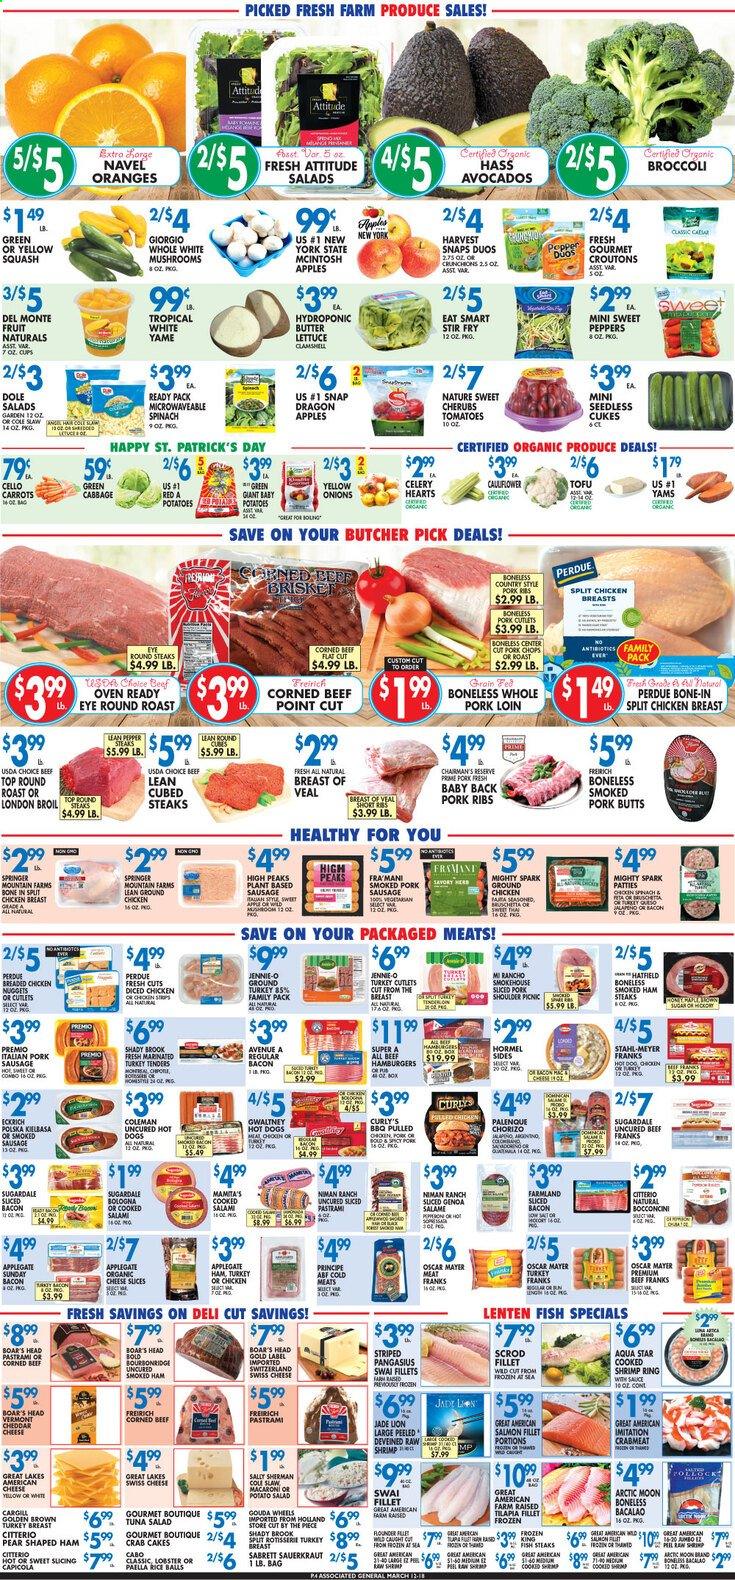 thumbnail - Associated Supermarkets Flyer - 03/12/2021 - 03/18/2021 - Sales products - butter lettuce, celery, lettuce, Dole, apples, pears, oranges, crab meat, lobster, salmon, salmon fillet, tilapia, tuna, pangasius, fish, shrimps, swai fillet, crab cake, hot dog, nuggets, salad, fried chicken, chicken nuggets, Perdue®, Hormel, bacon, salami, ham, ham steaks, chorizo, smoked ham, bologna sausage, Oscar Mayer, sausage, potato salad, tuna salad, american cheese, bocconcini, gouda, swiss cheese, cheddar, cheese, tofu, carrots, paella, croutons, sugar, oats, sauerkraut, jalapeño, rice, macaroni, pepper, pork sausage, Sol, ground chicken, ground turkey, turkey breast, chicken breasts, beef meat, corned beef, pastrami, steak, round roast, pork chops, pork loin, pork meat, pork ribs, pork shoulder, avocado. Page 4.